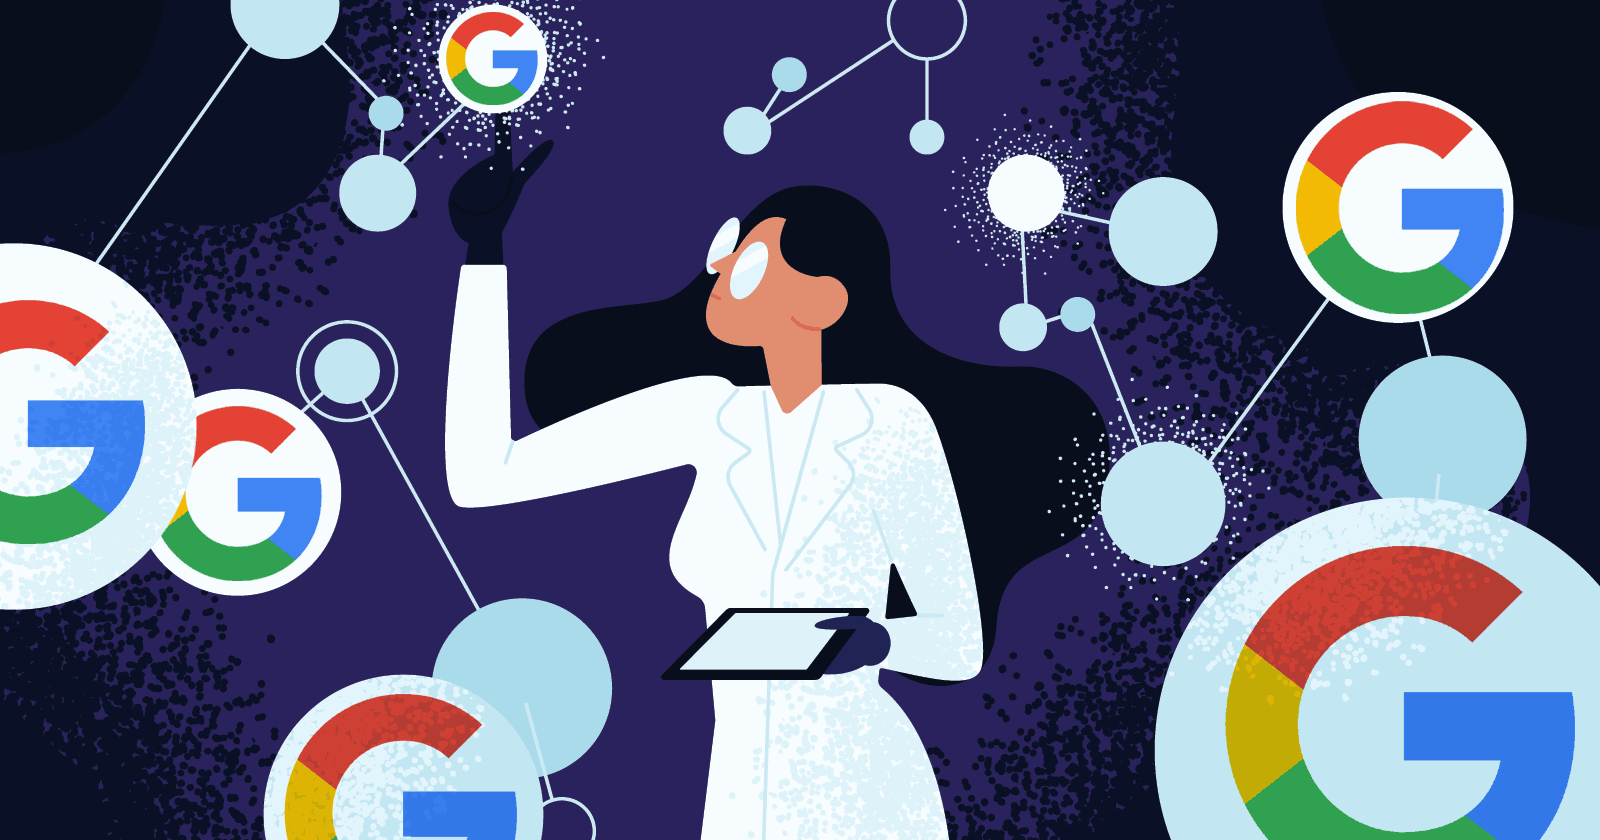 illustration of a data scientist surrounded by bubbles containing the Google G logo